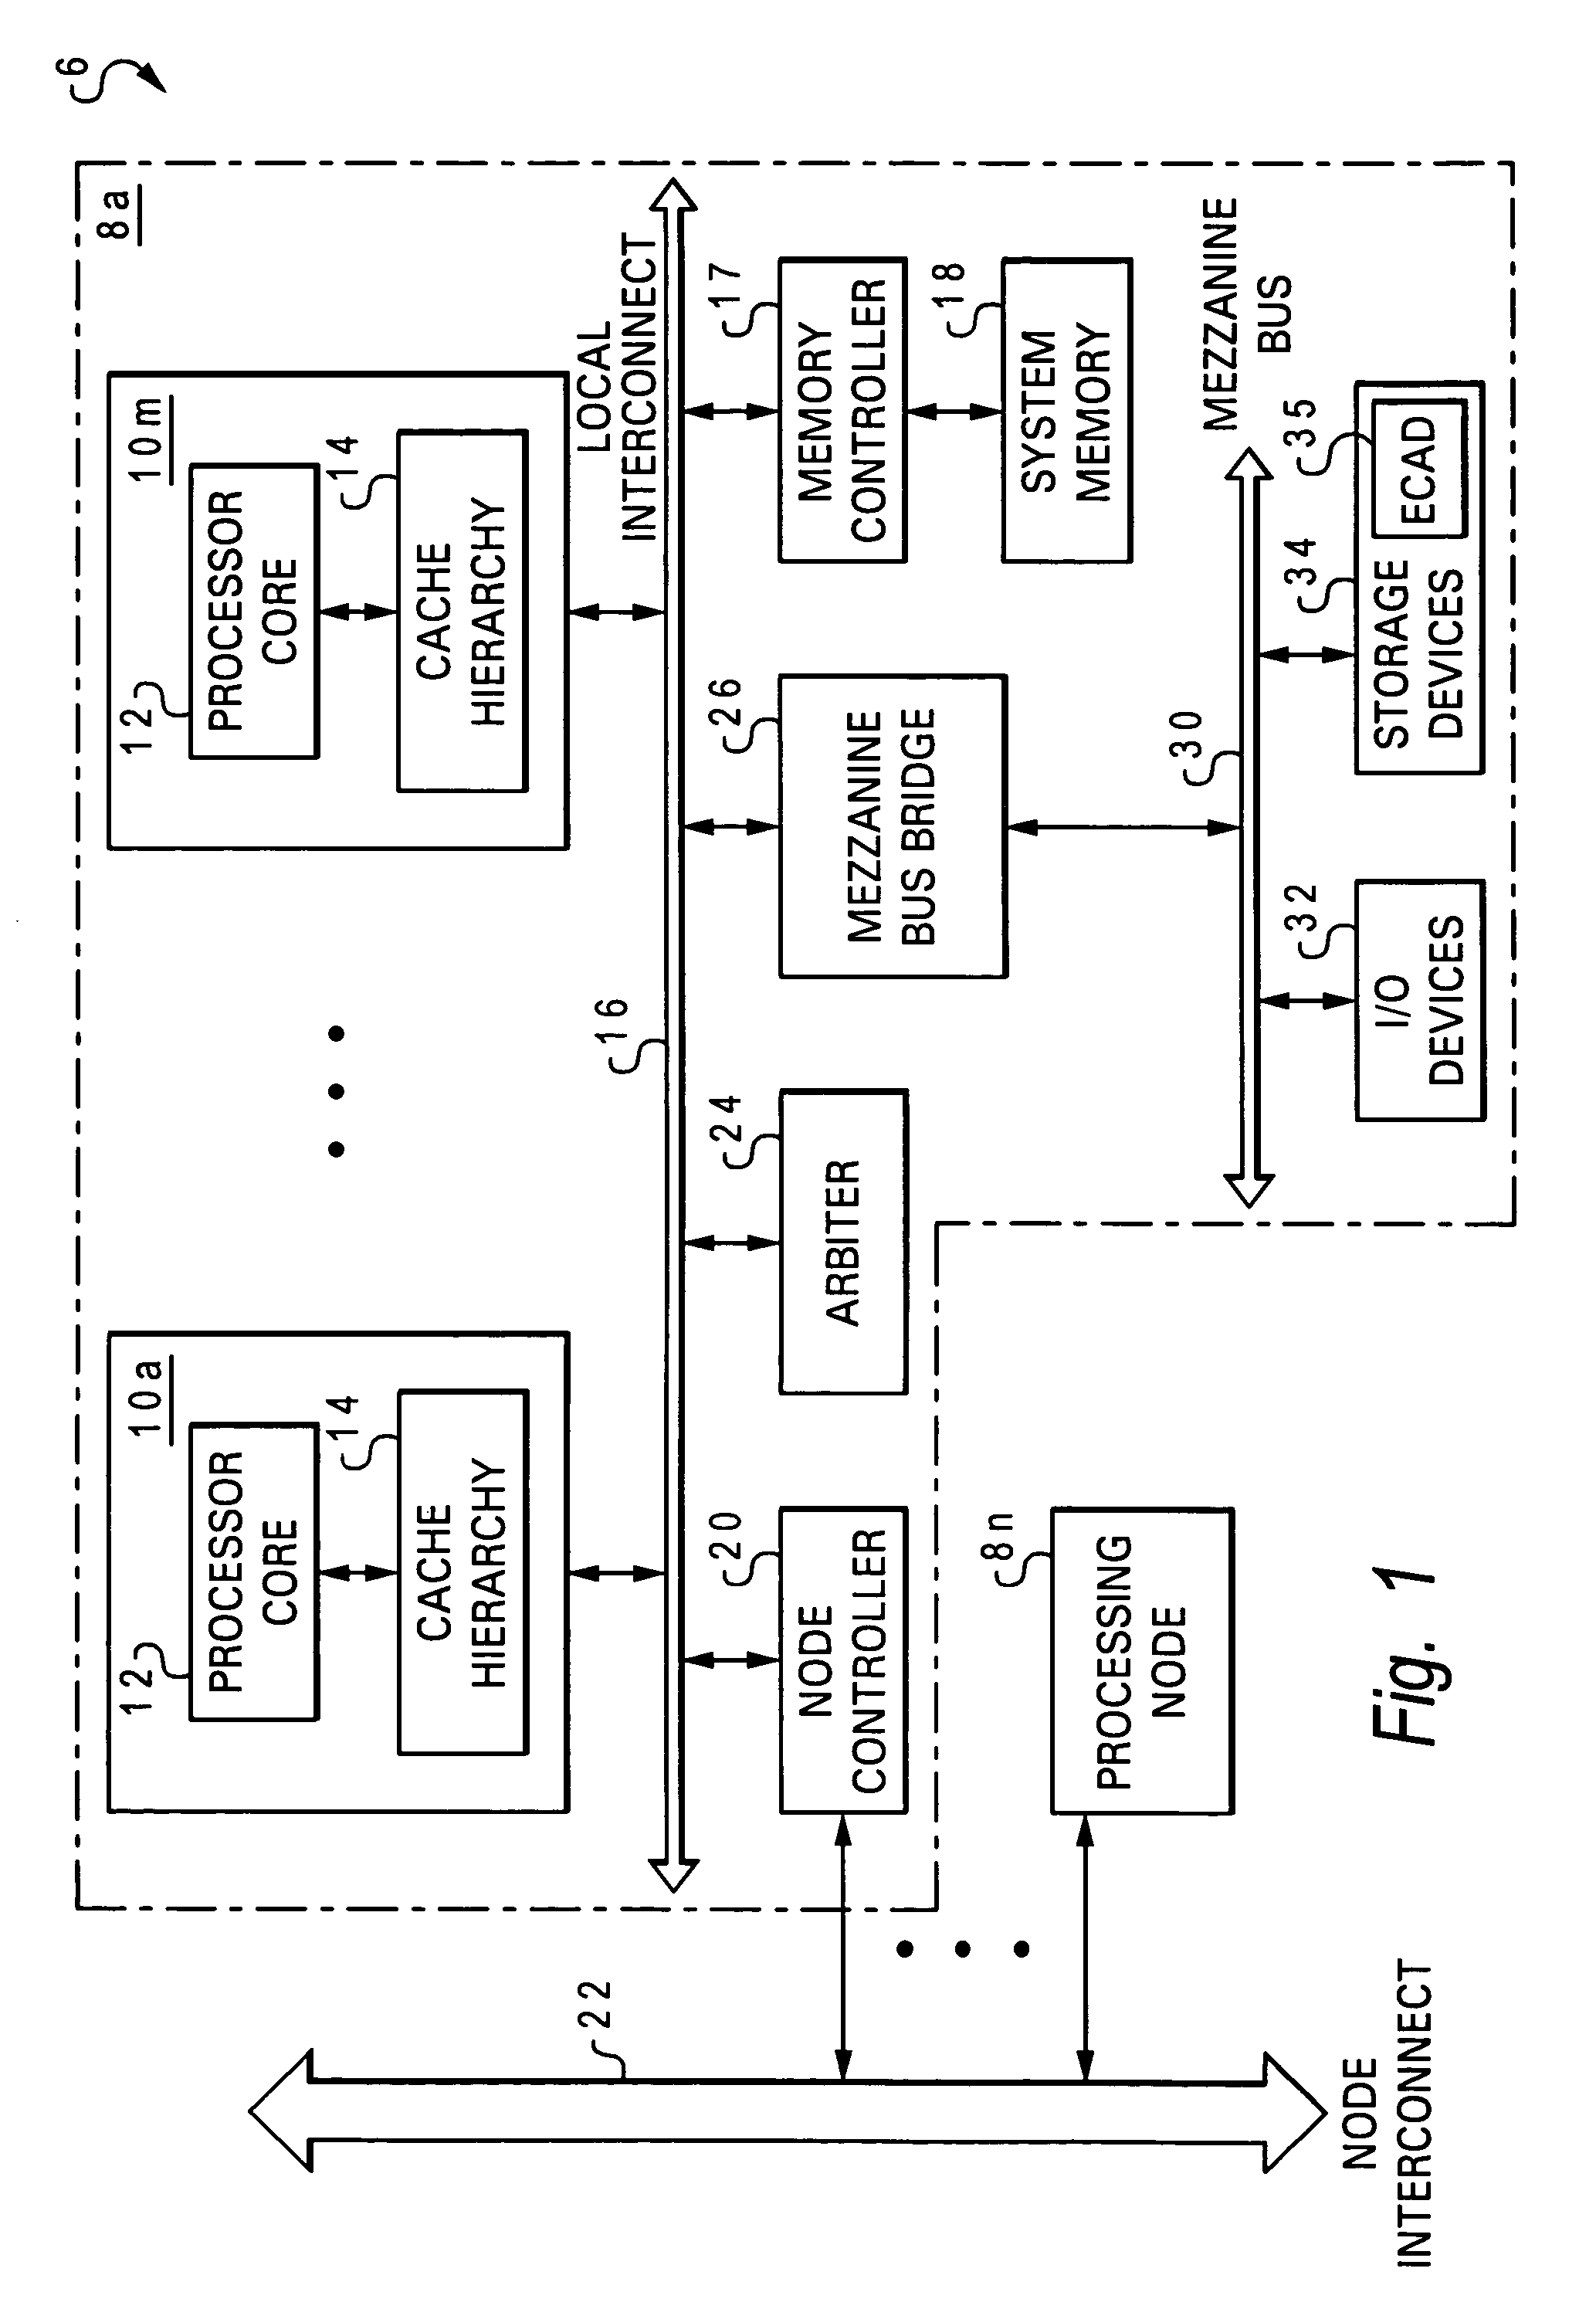 Method, system and program product for providing a configuration specification language supporting selective presentation of configuration entities